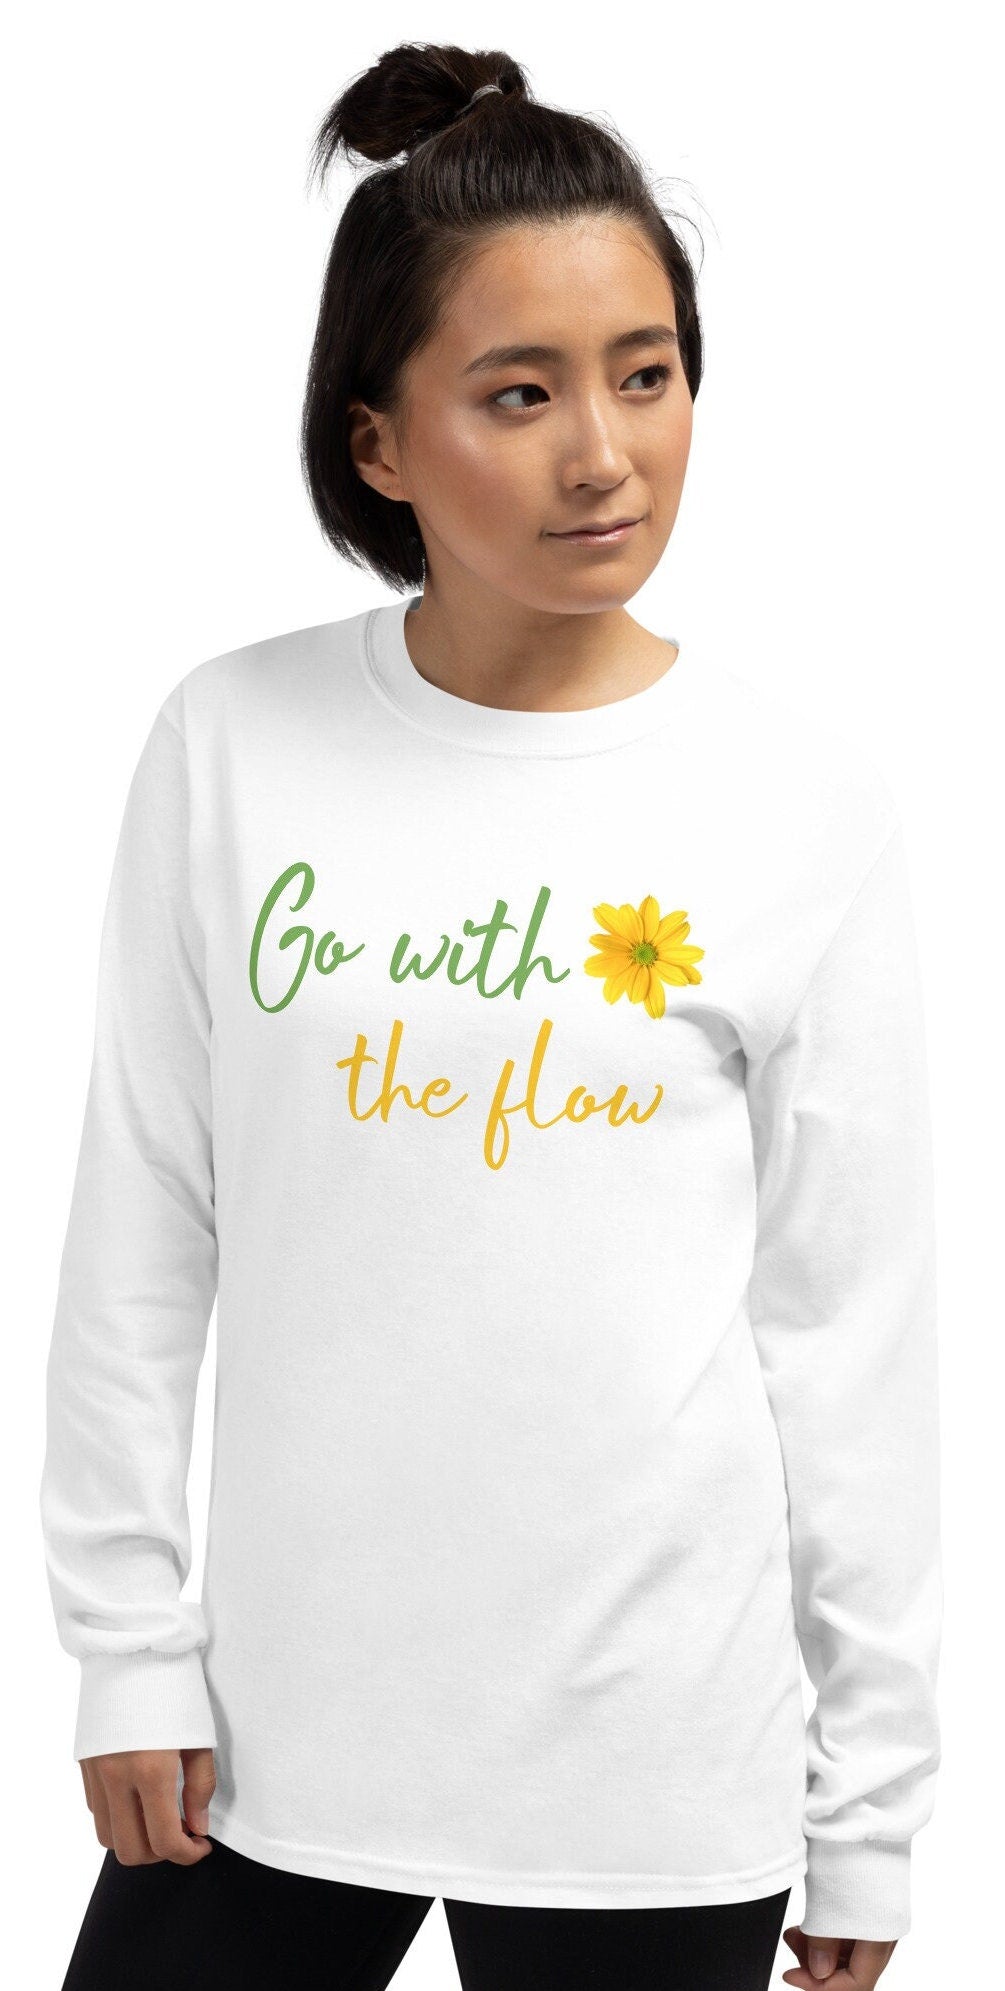 Inspirational Quotes Long Sleeve Shirt, Go with The Flow Mental Health Shirt, Motivational Shirt, Inspirational Shirt, Self Care Shirt